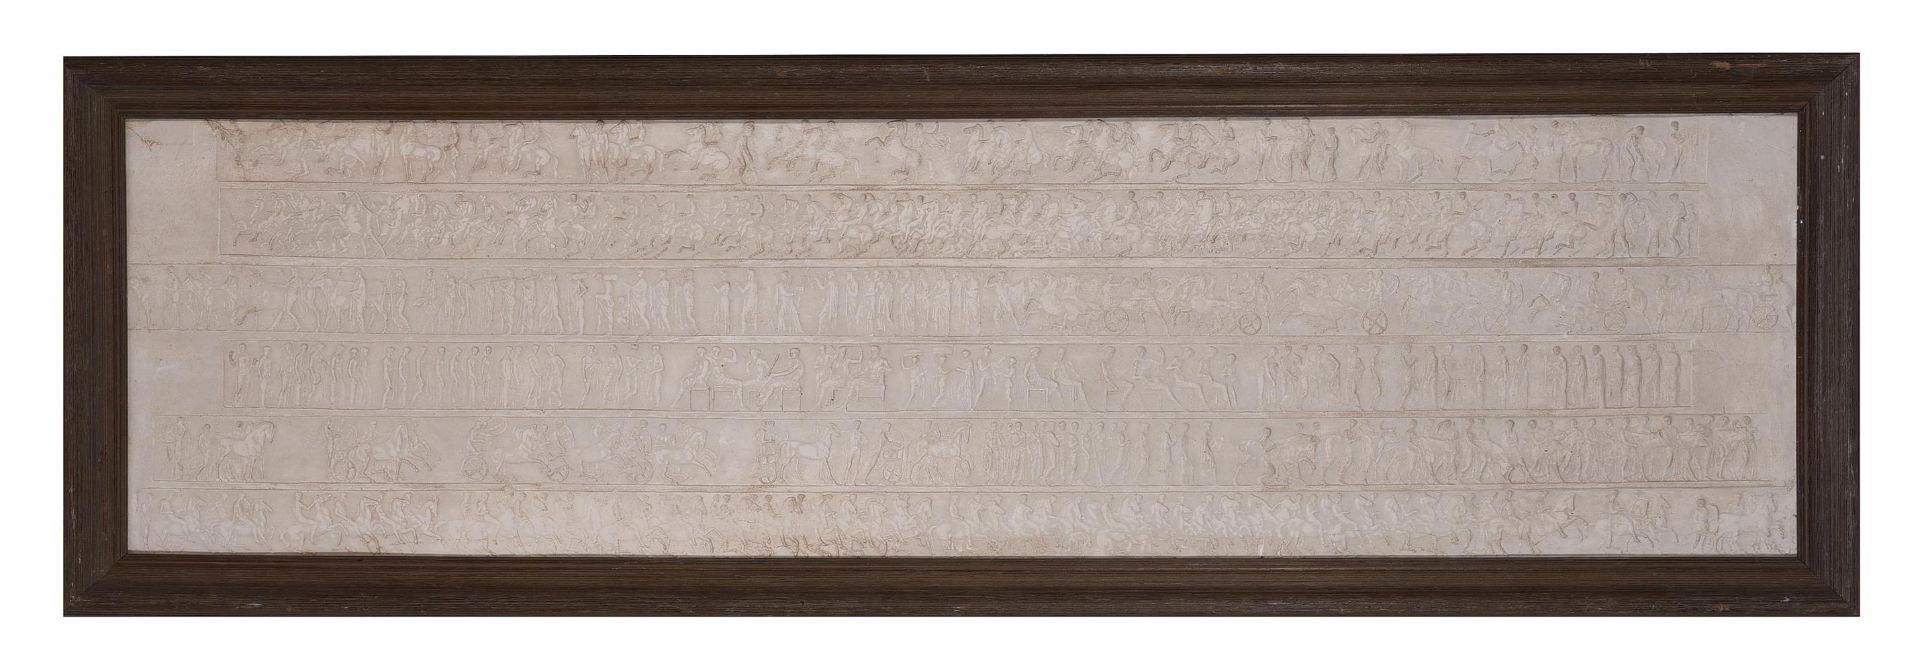 A SET OF THREE FRAMED PLASTER RELIEFS OF SECTIONS OF THE PARTHENON FRIEZE, 20TH CENTURY - Bild 4 aus 11